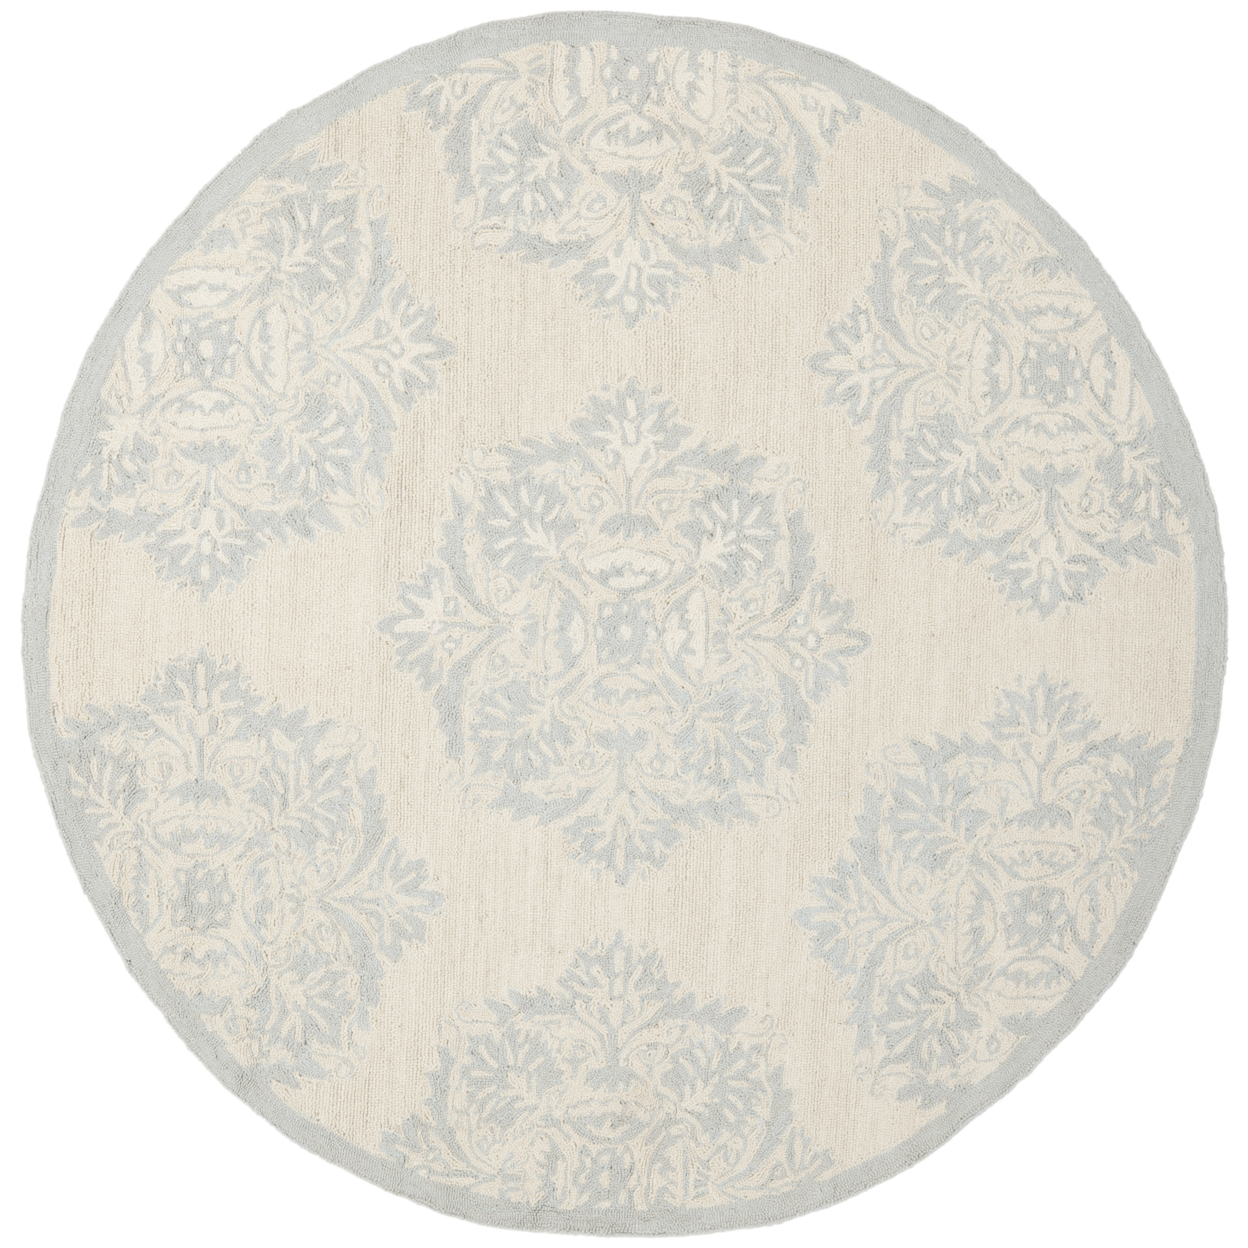 SAFAVIEH Chelsea HK359A Hand-hooked Ivory / Blue Rug - 5' 6 Round